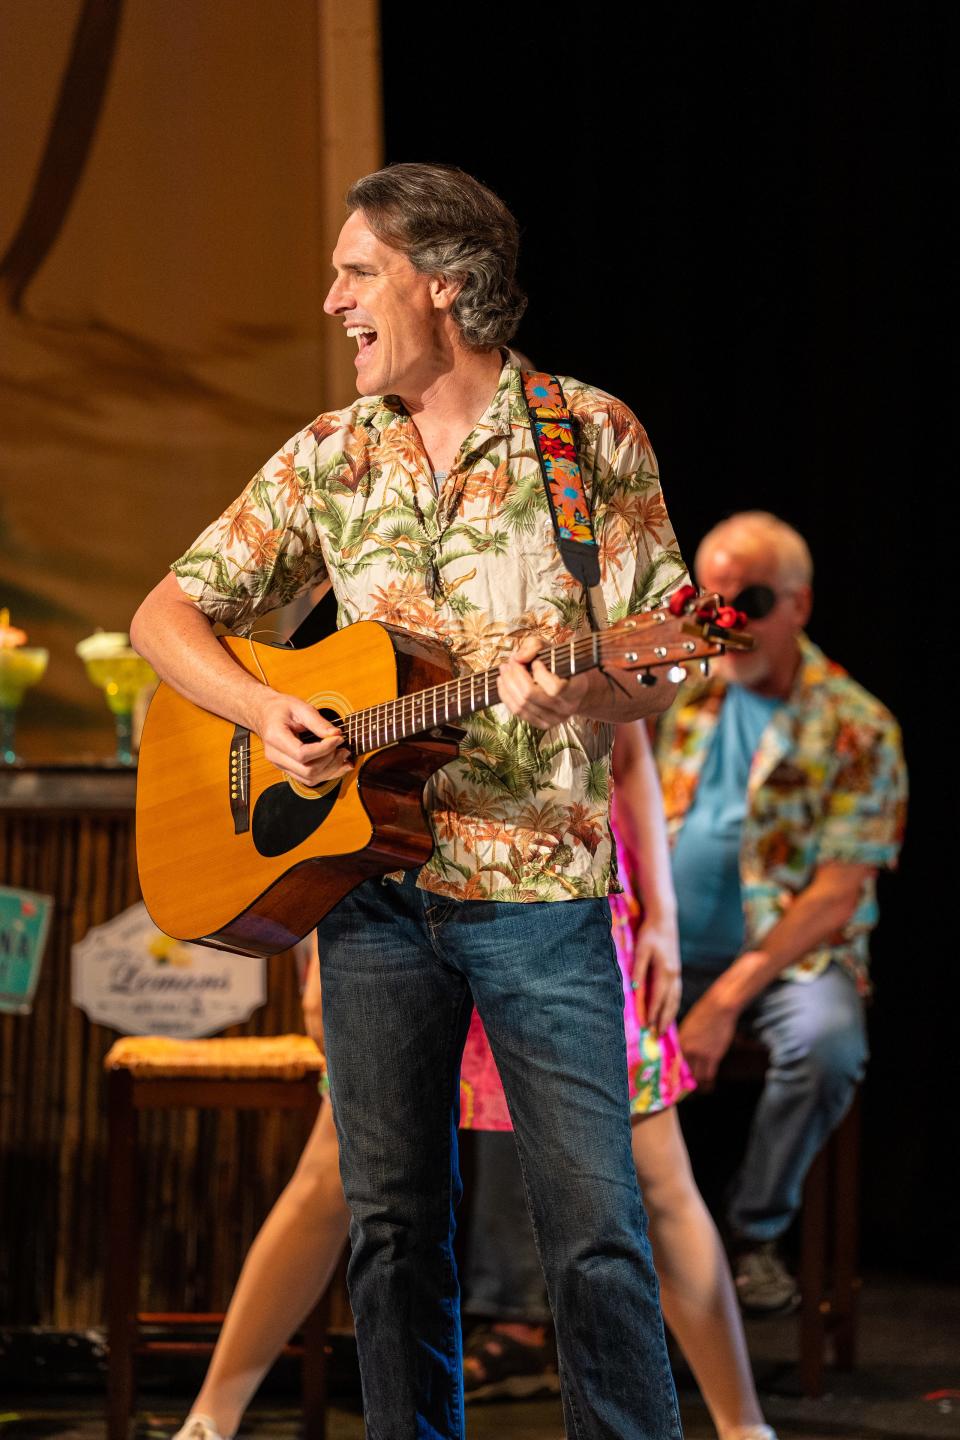 Gerritt VanderMeer performs as Tully during a Feb. 6 dress rehearsal of the TheatreZone production of "Escape to Margaritaville" that runs Feb. 9-19, 2023, in Naples, Florida. (Photo by Nick Shirghio)